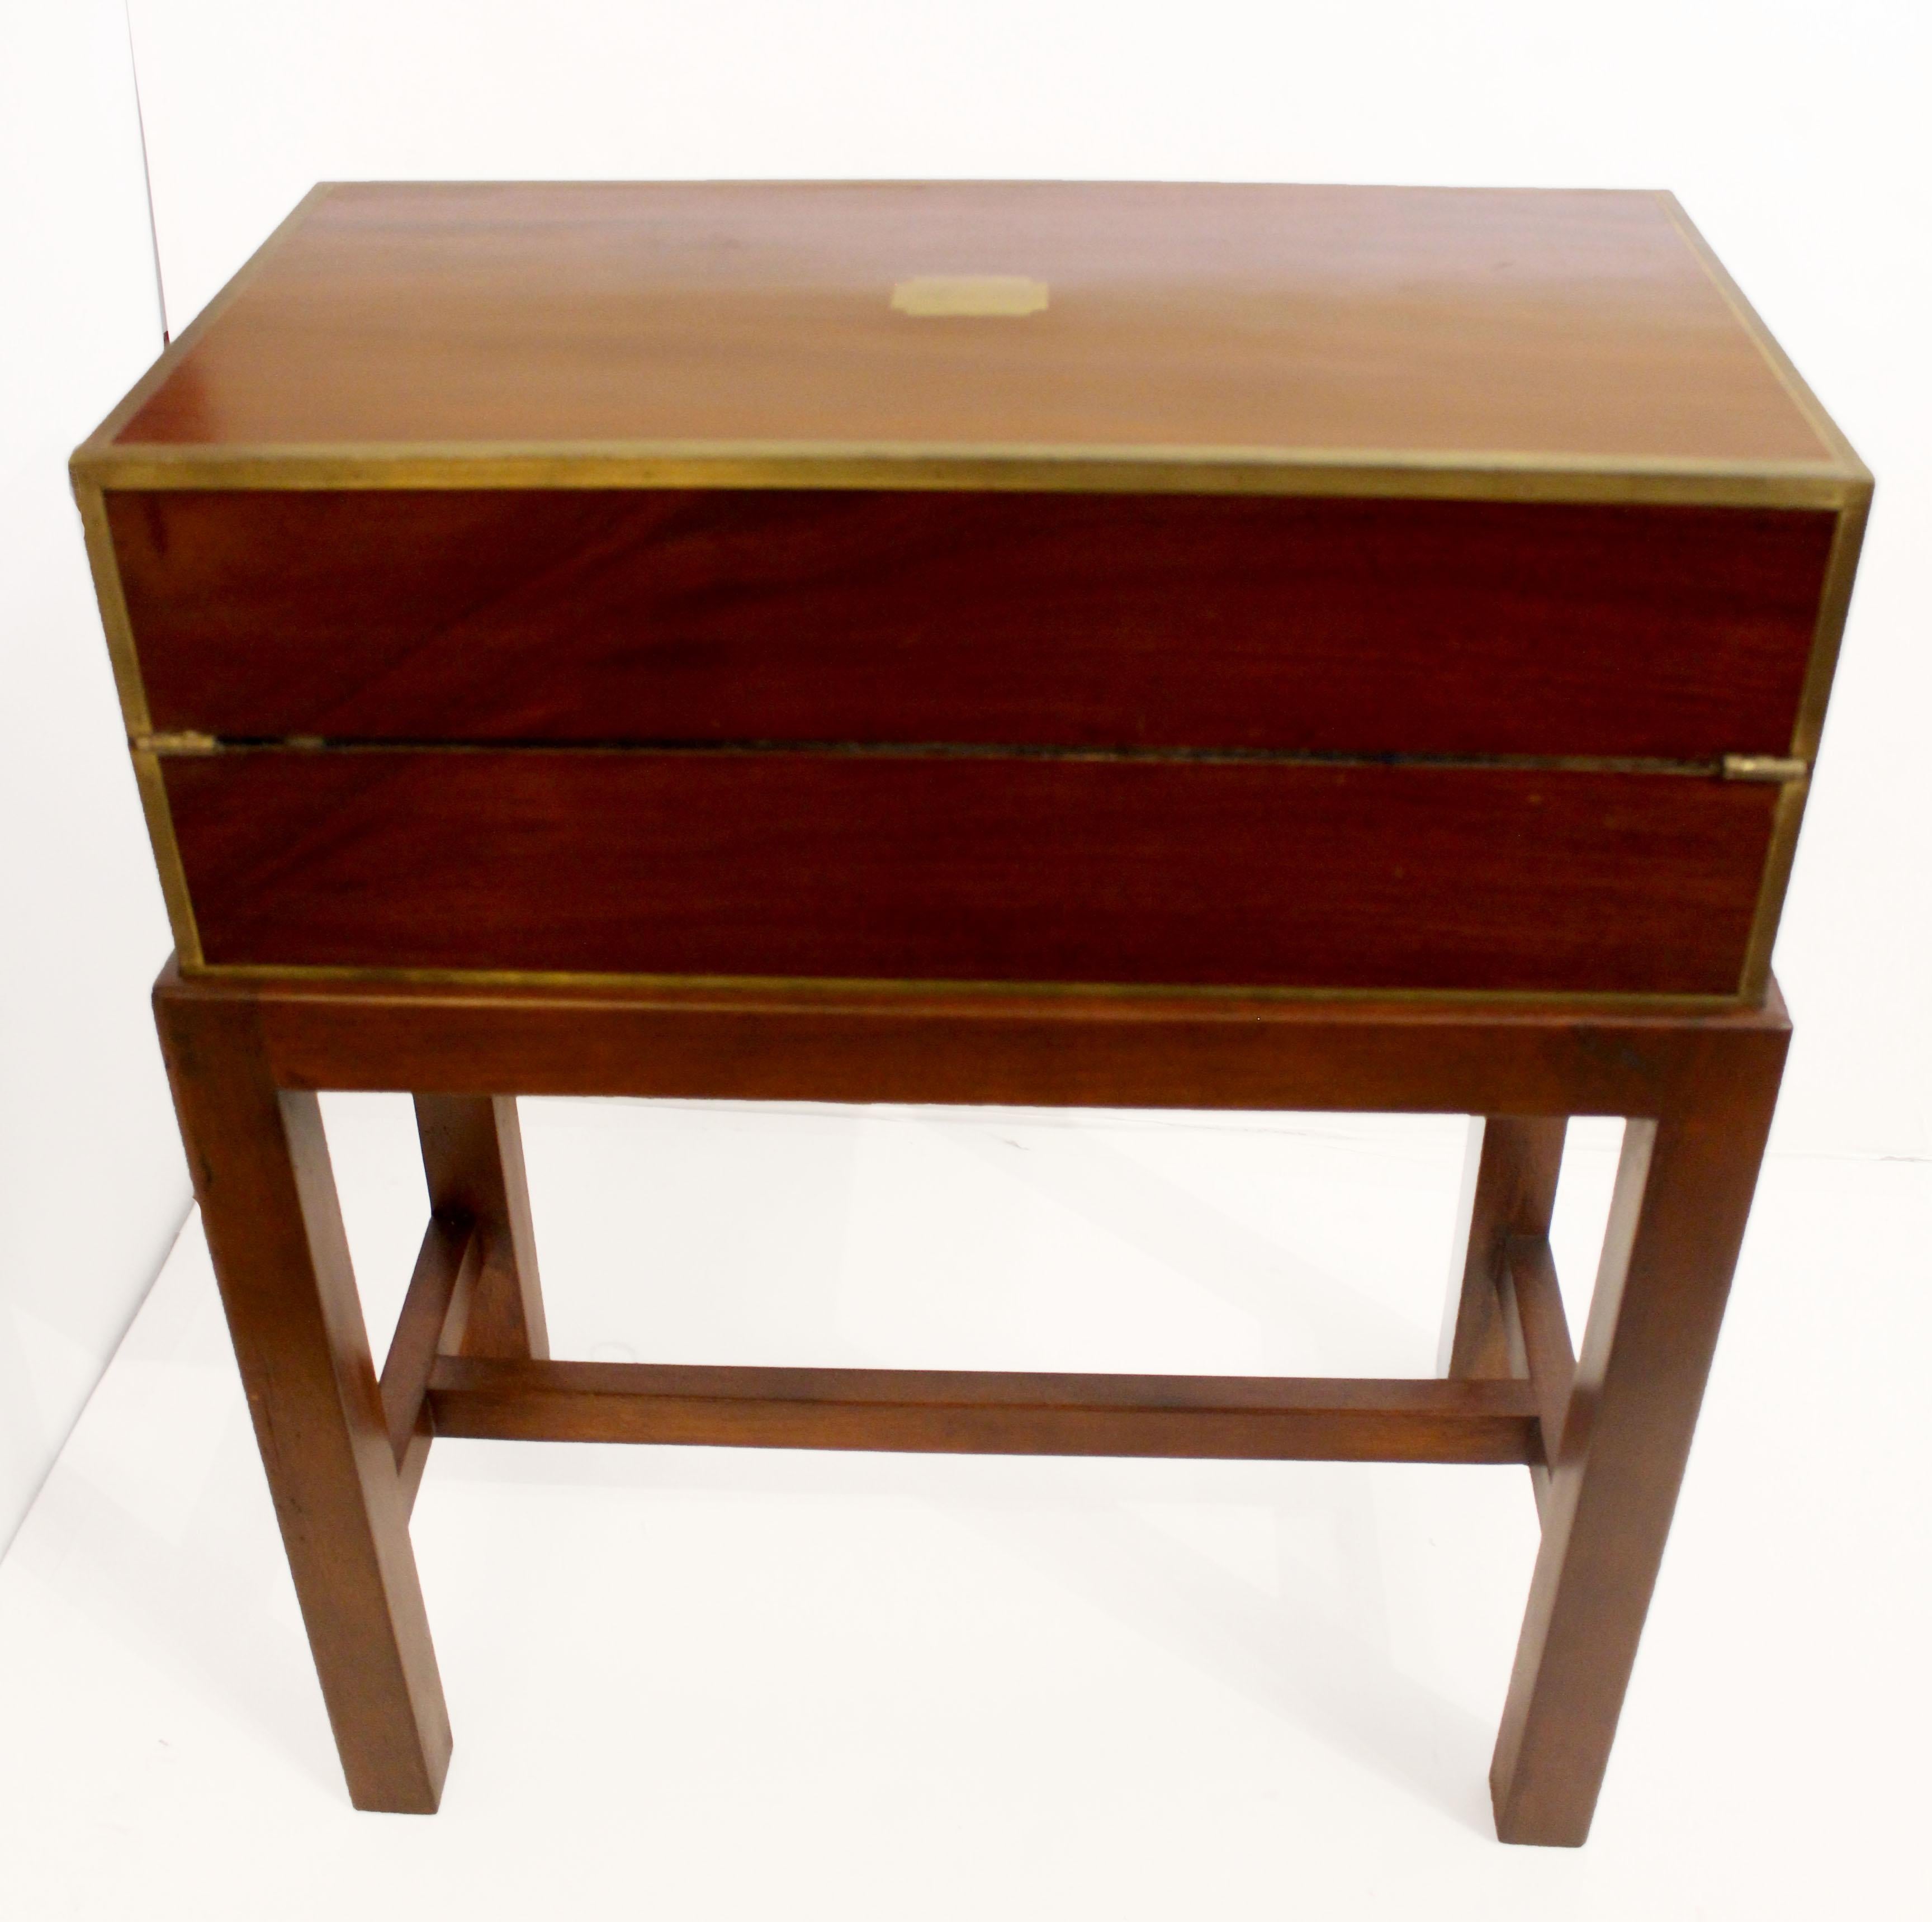 Circa 1860 English Lap Desk on Custom-Made Side Table Stand 7